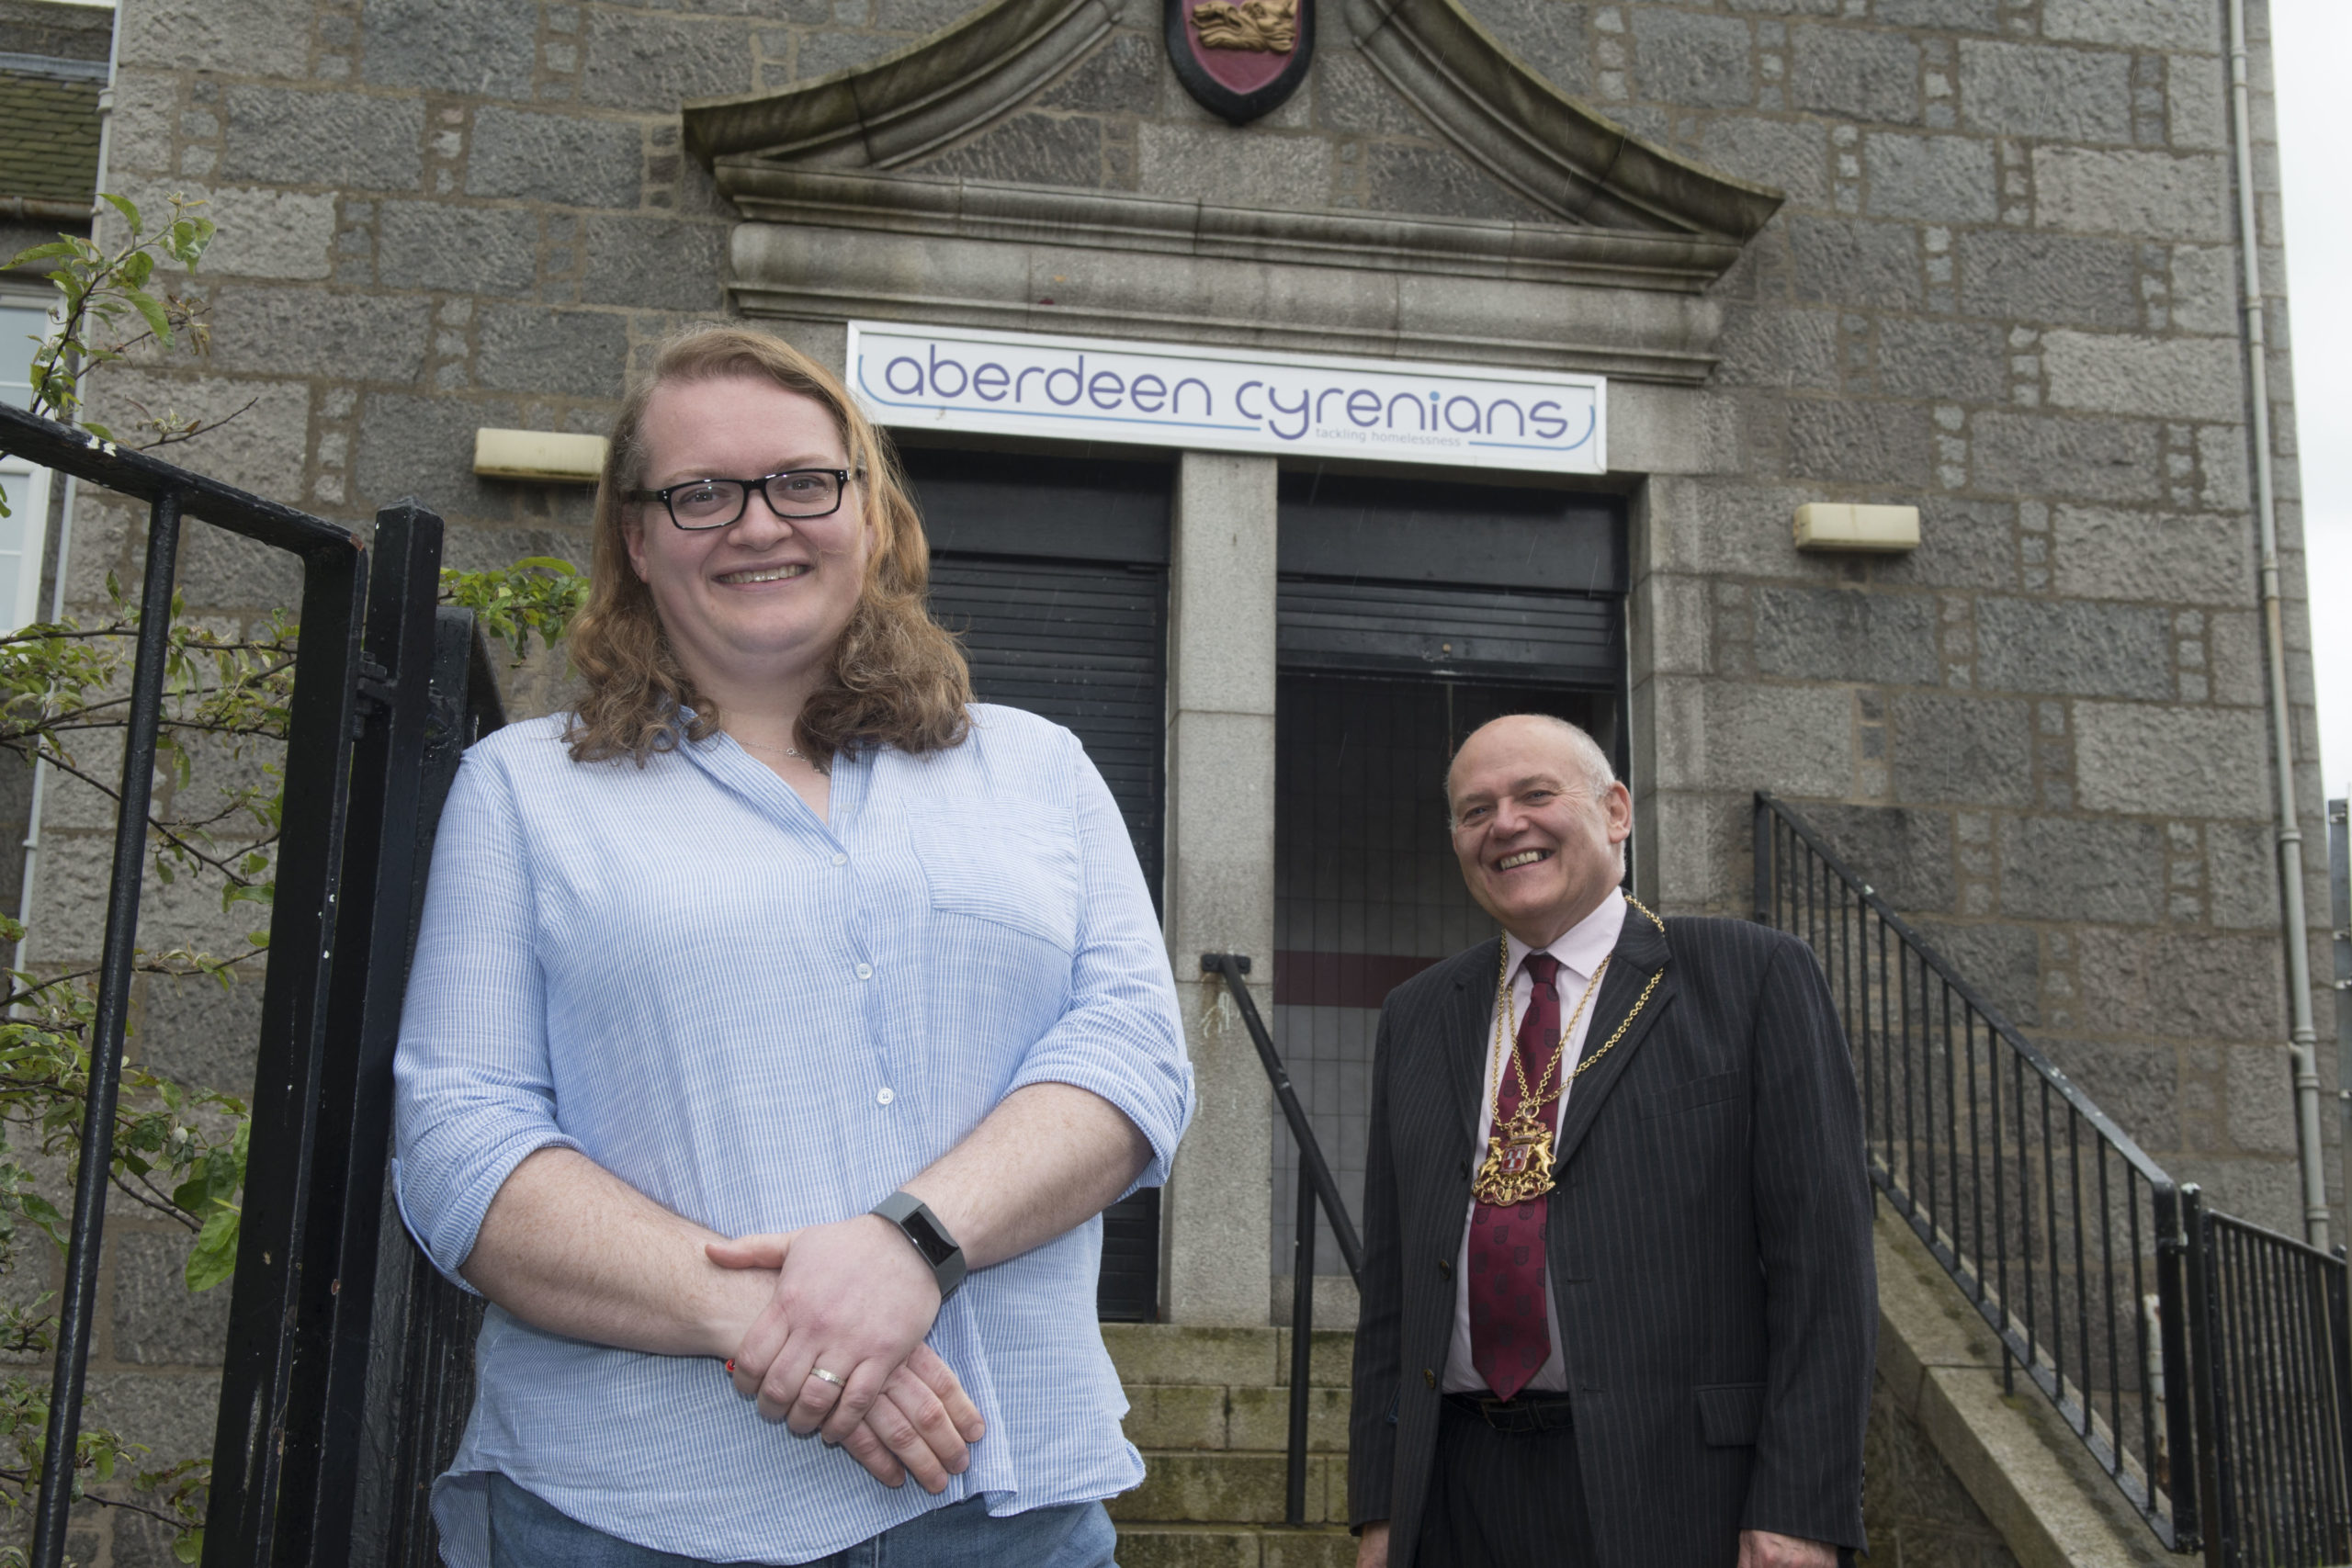 Aberdeen Cyrenians are one of the local charities to receive a support grant